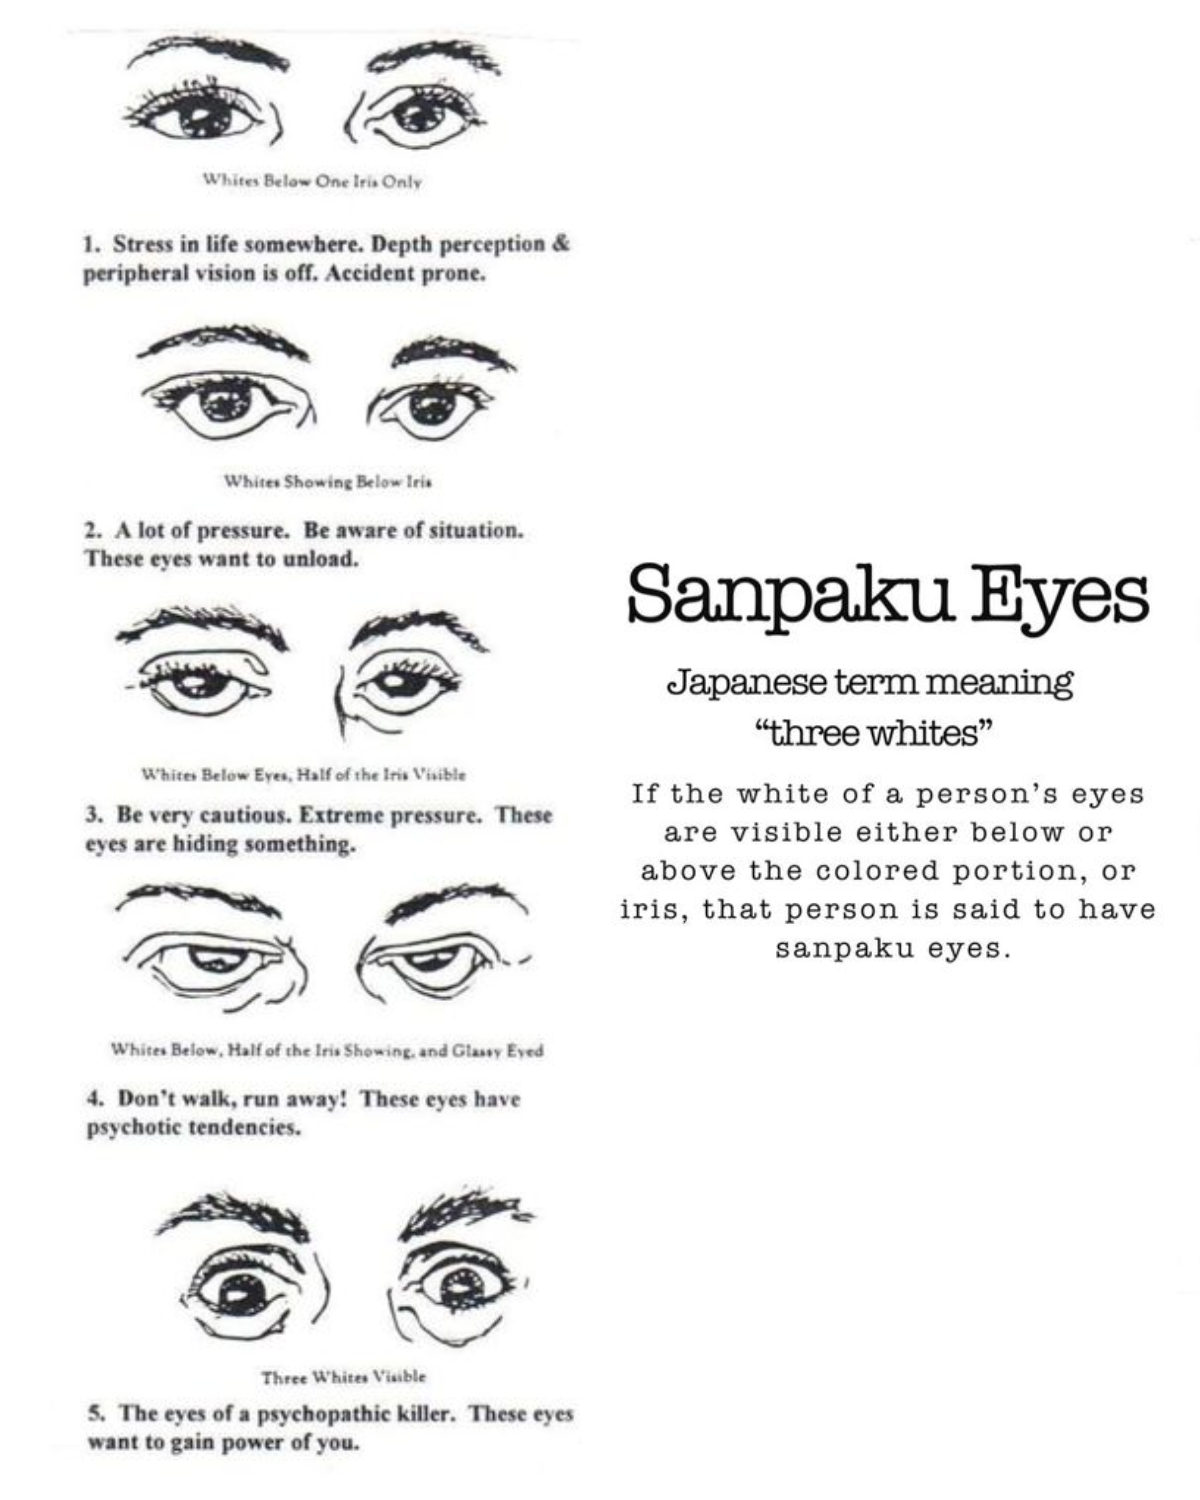 Different types of eyes according to japanese superstition on sanpaku eyes